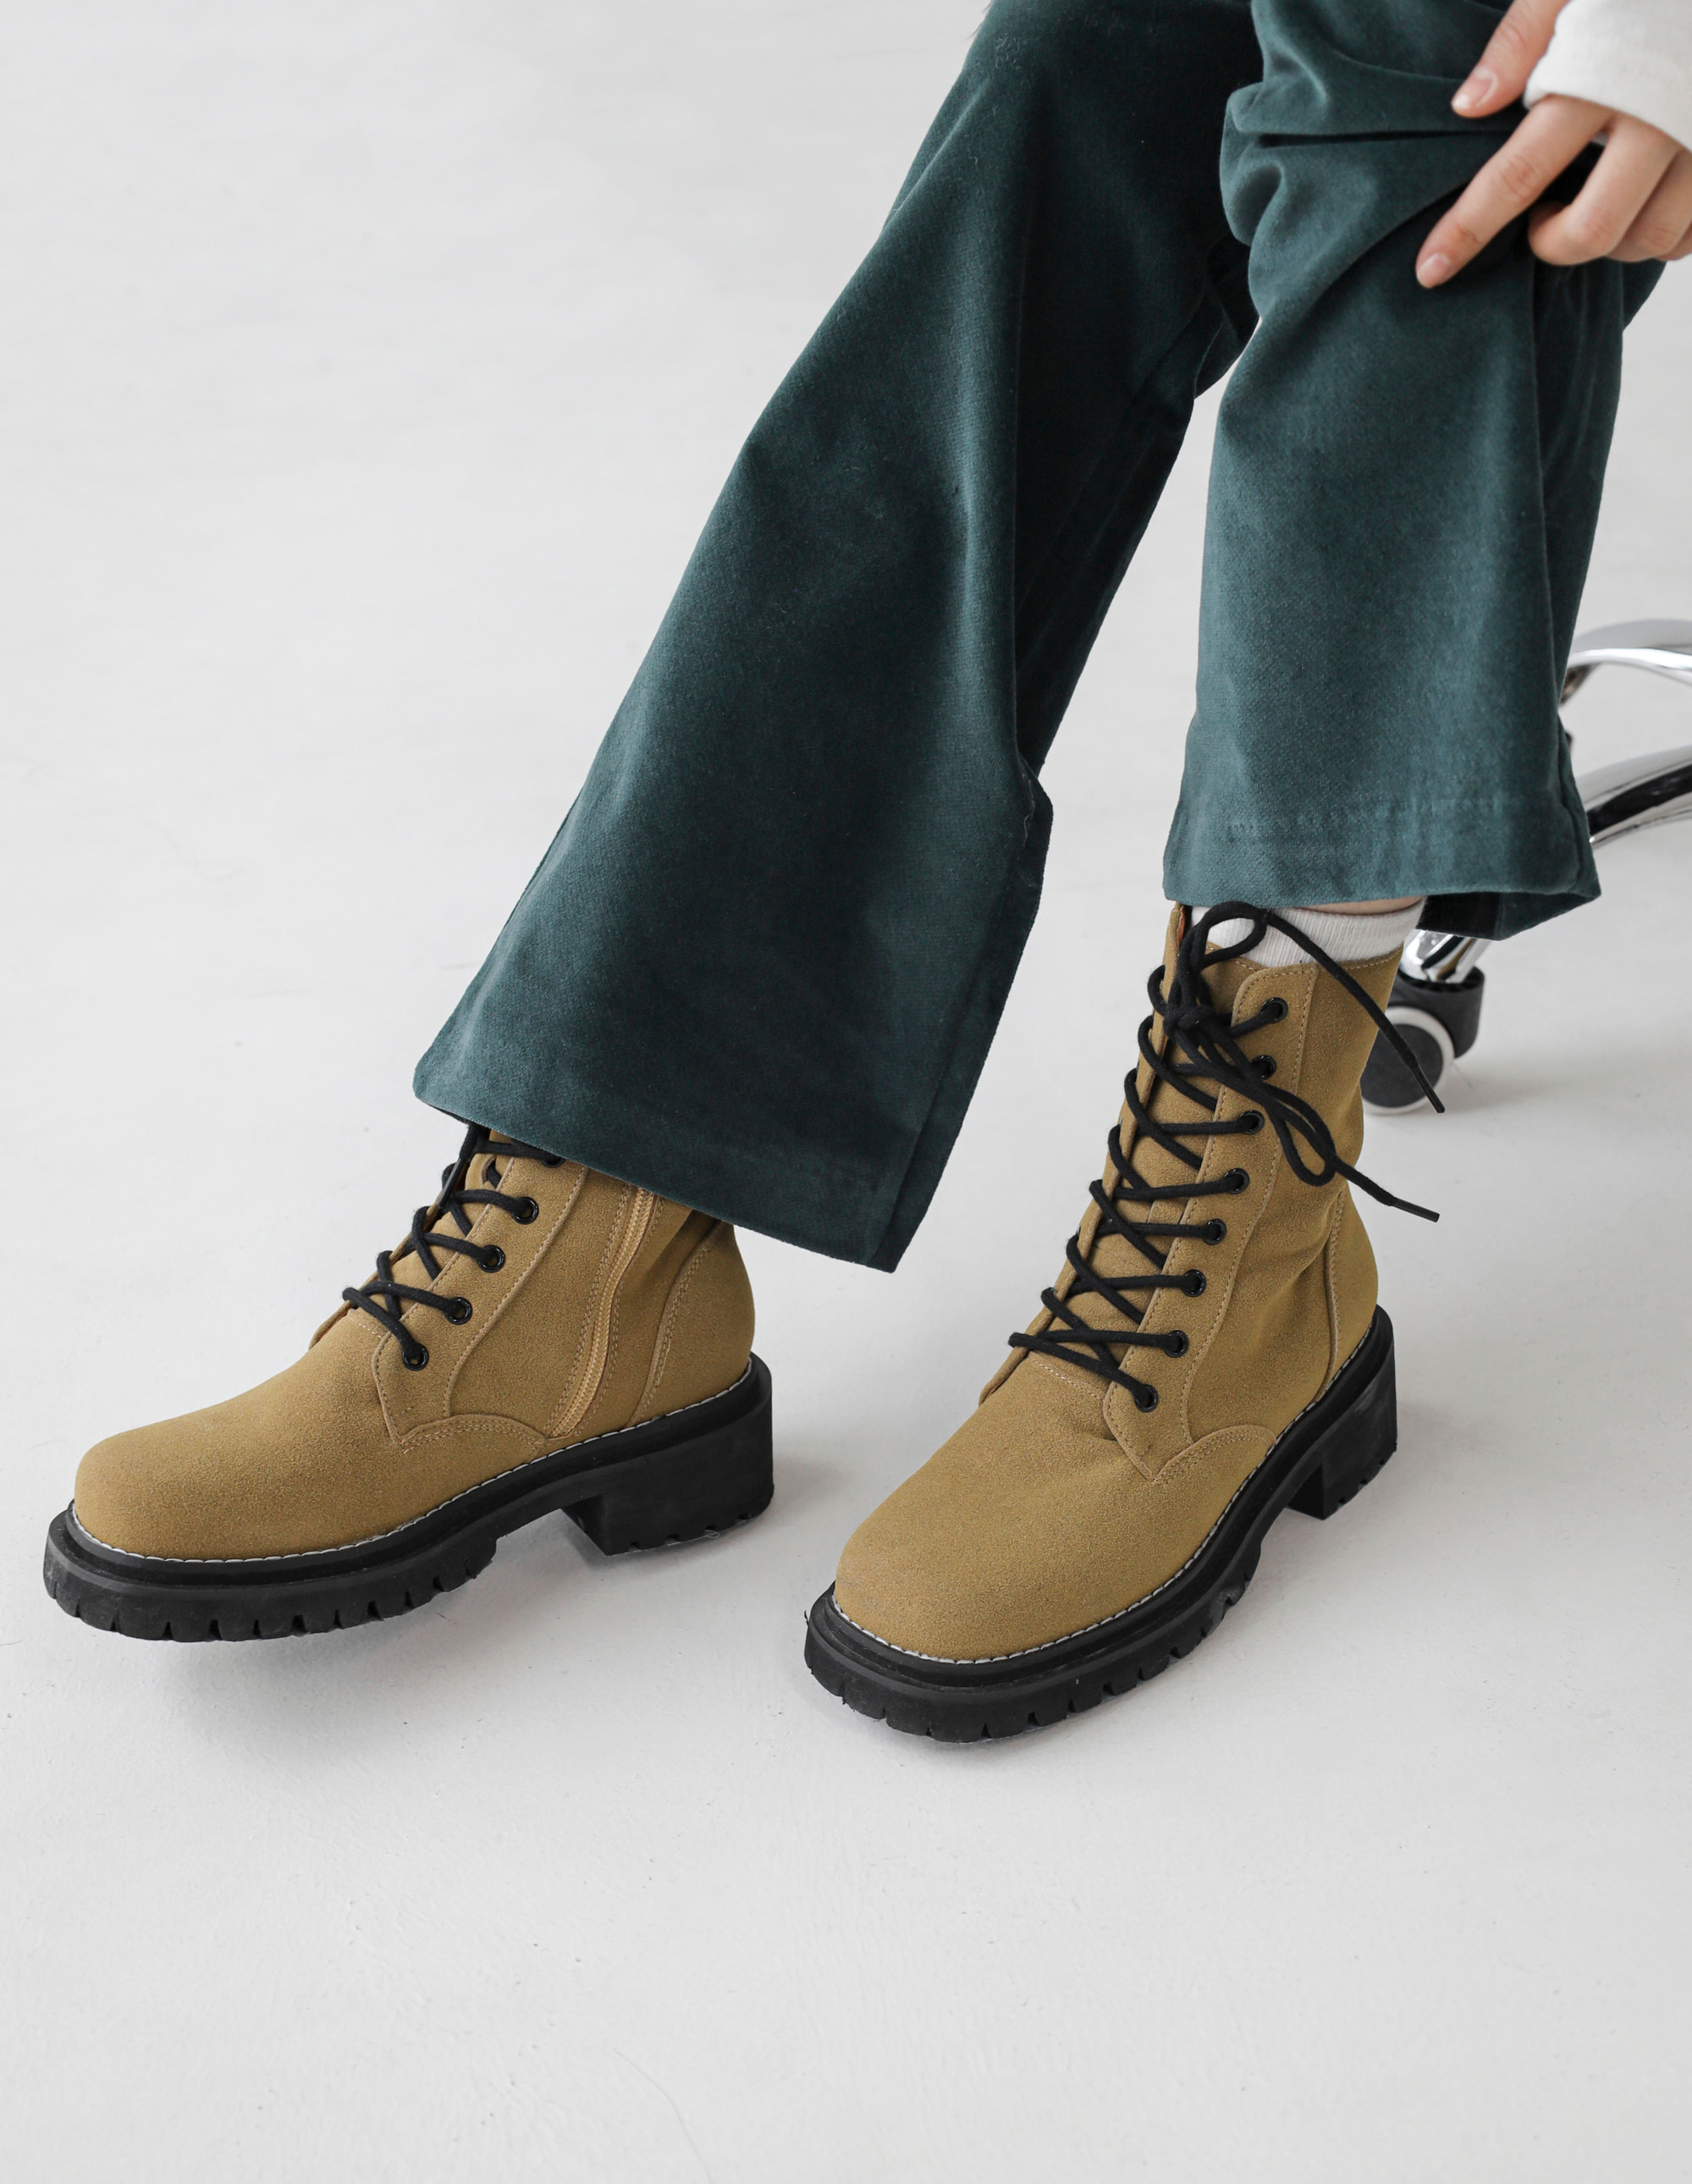  Lace-up Walker Boots